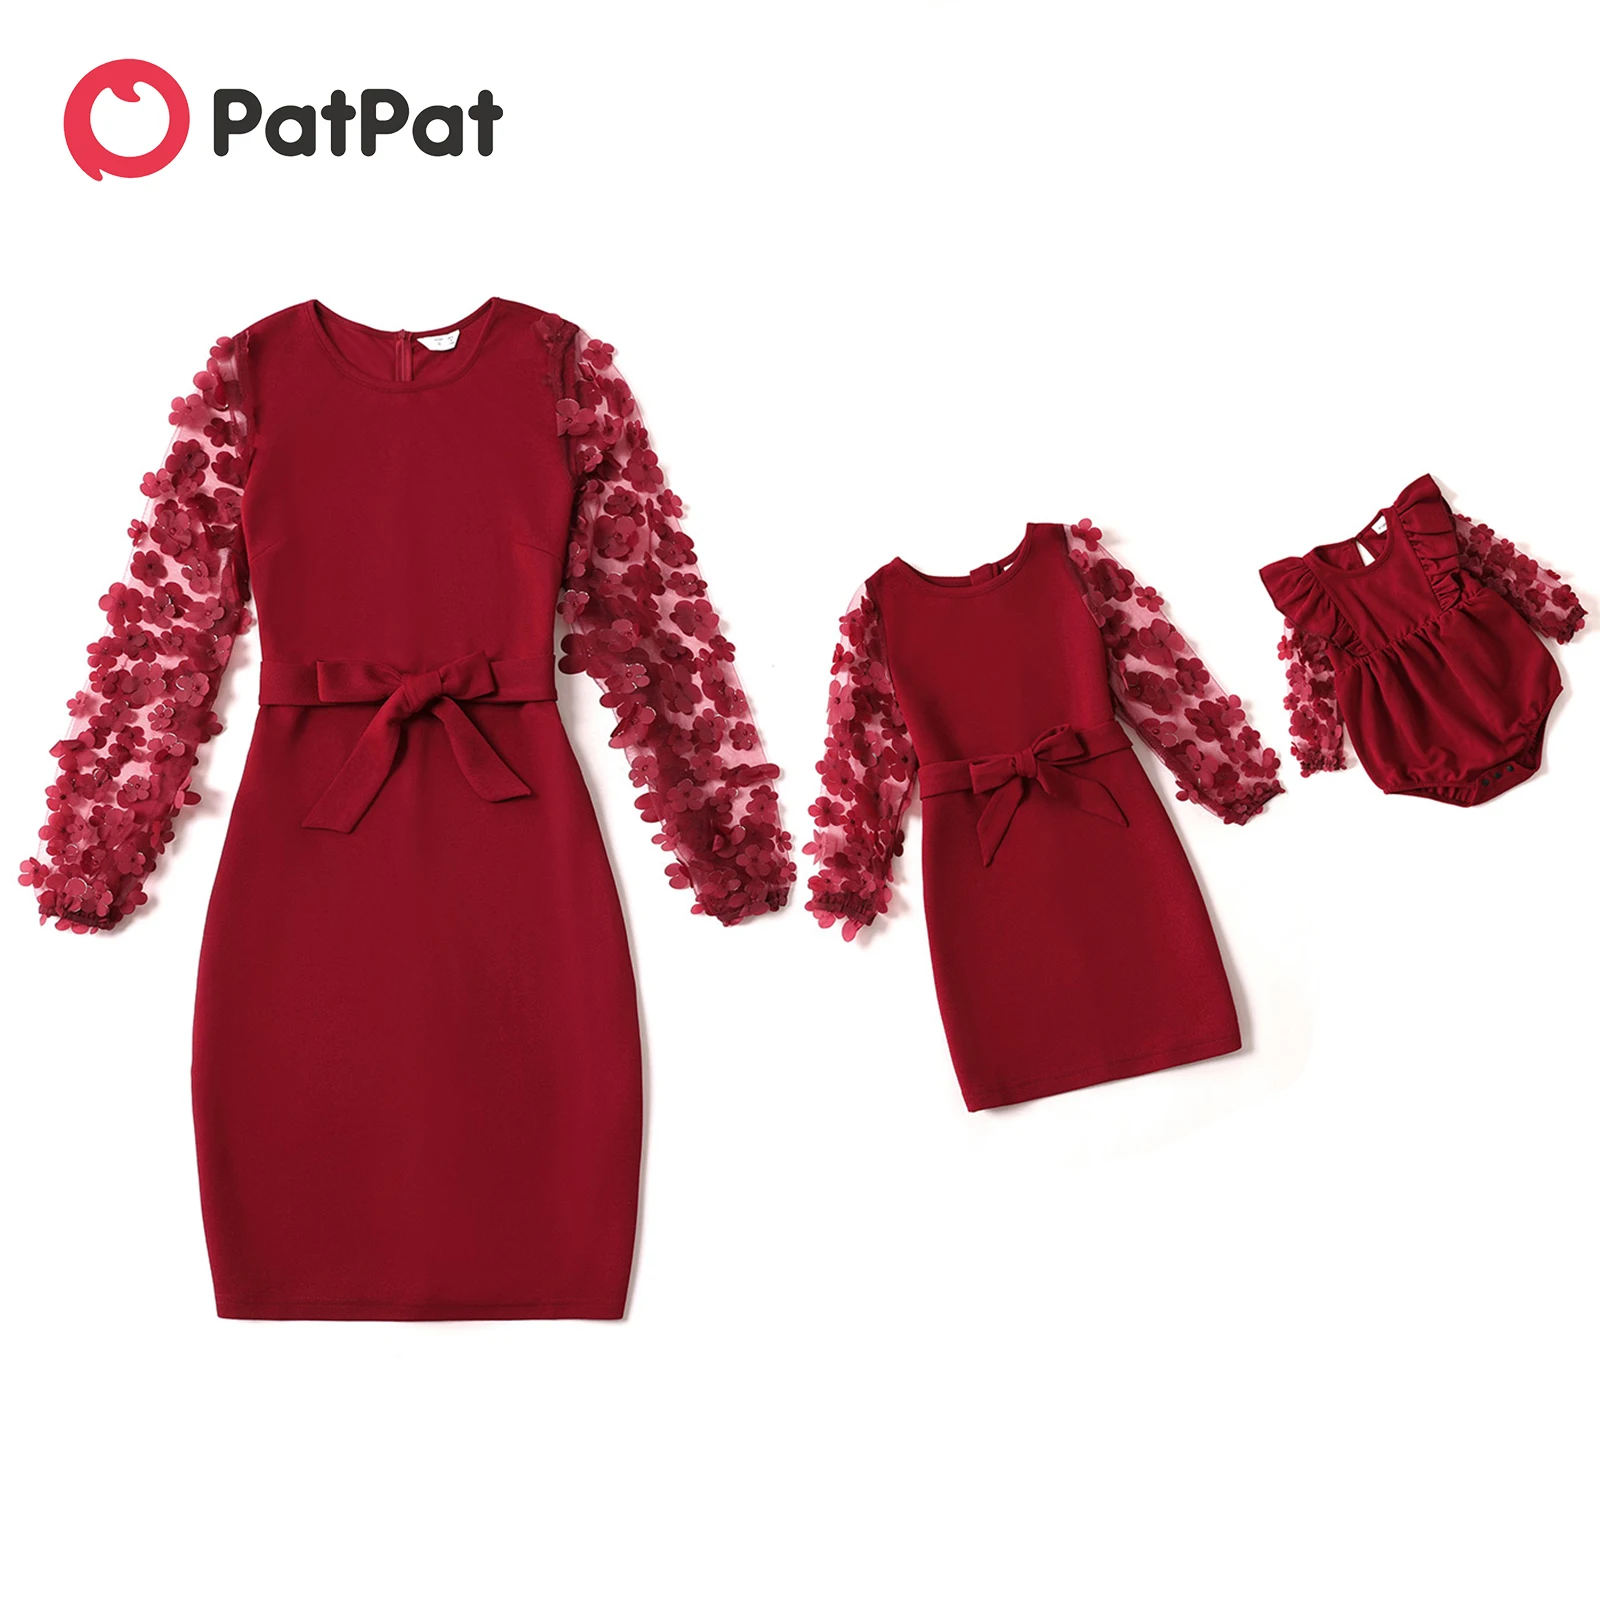 PatPat 3D Floral Appliques Mesh Long-sleeve Belted Bodycon Dress for Mom and Me